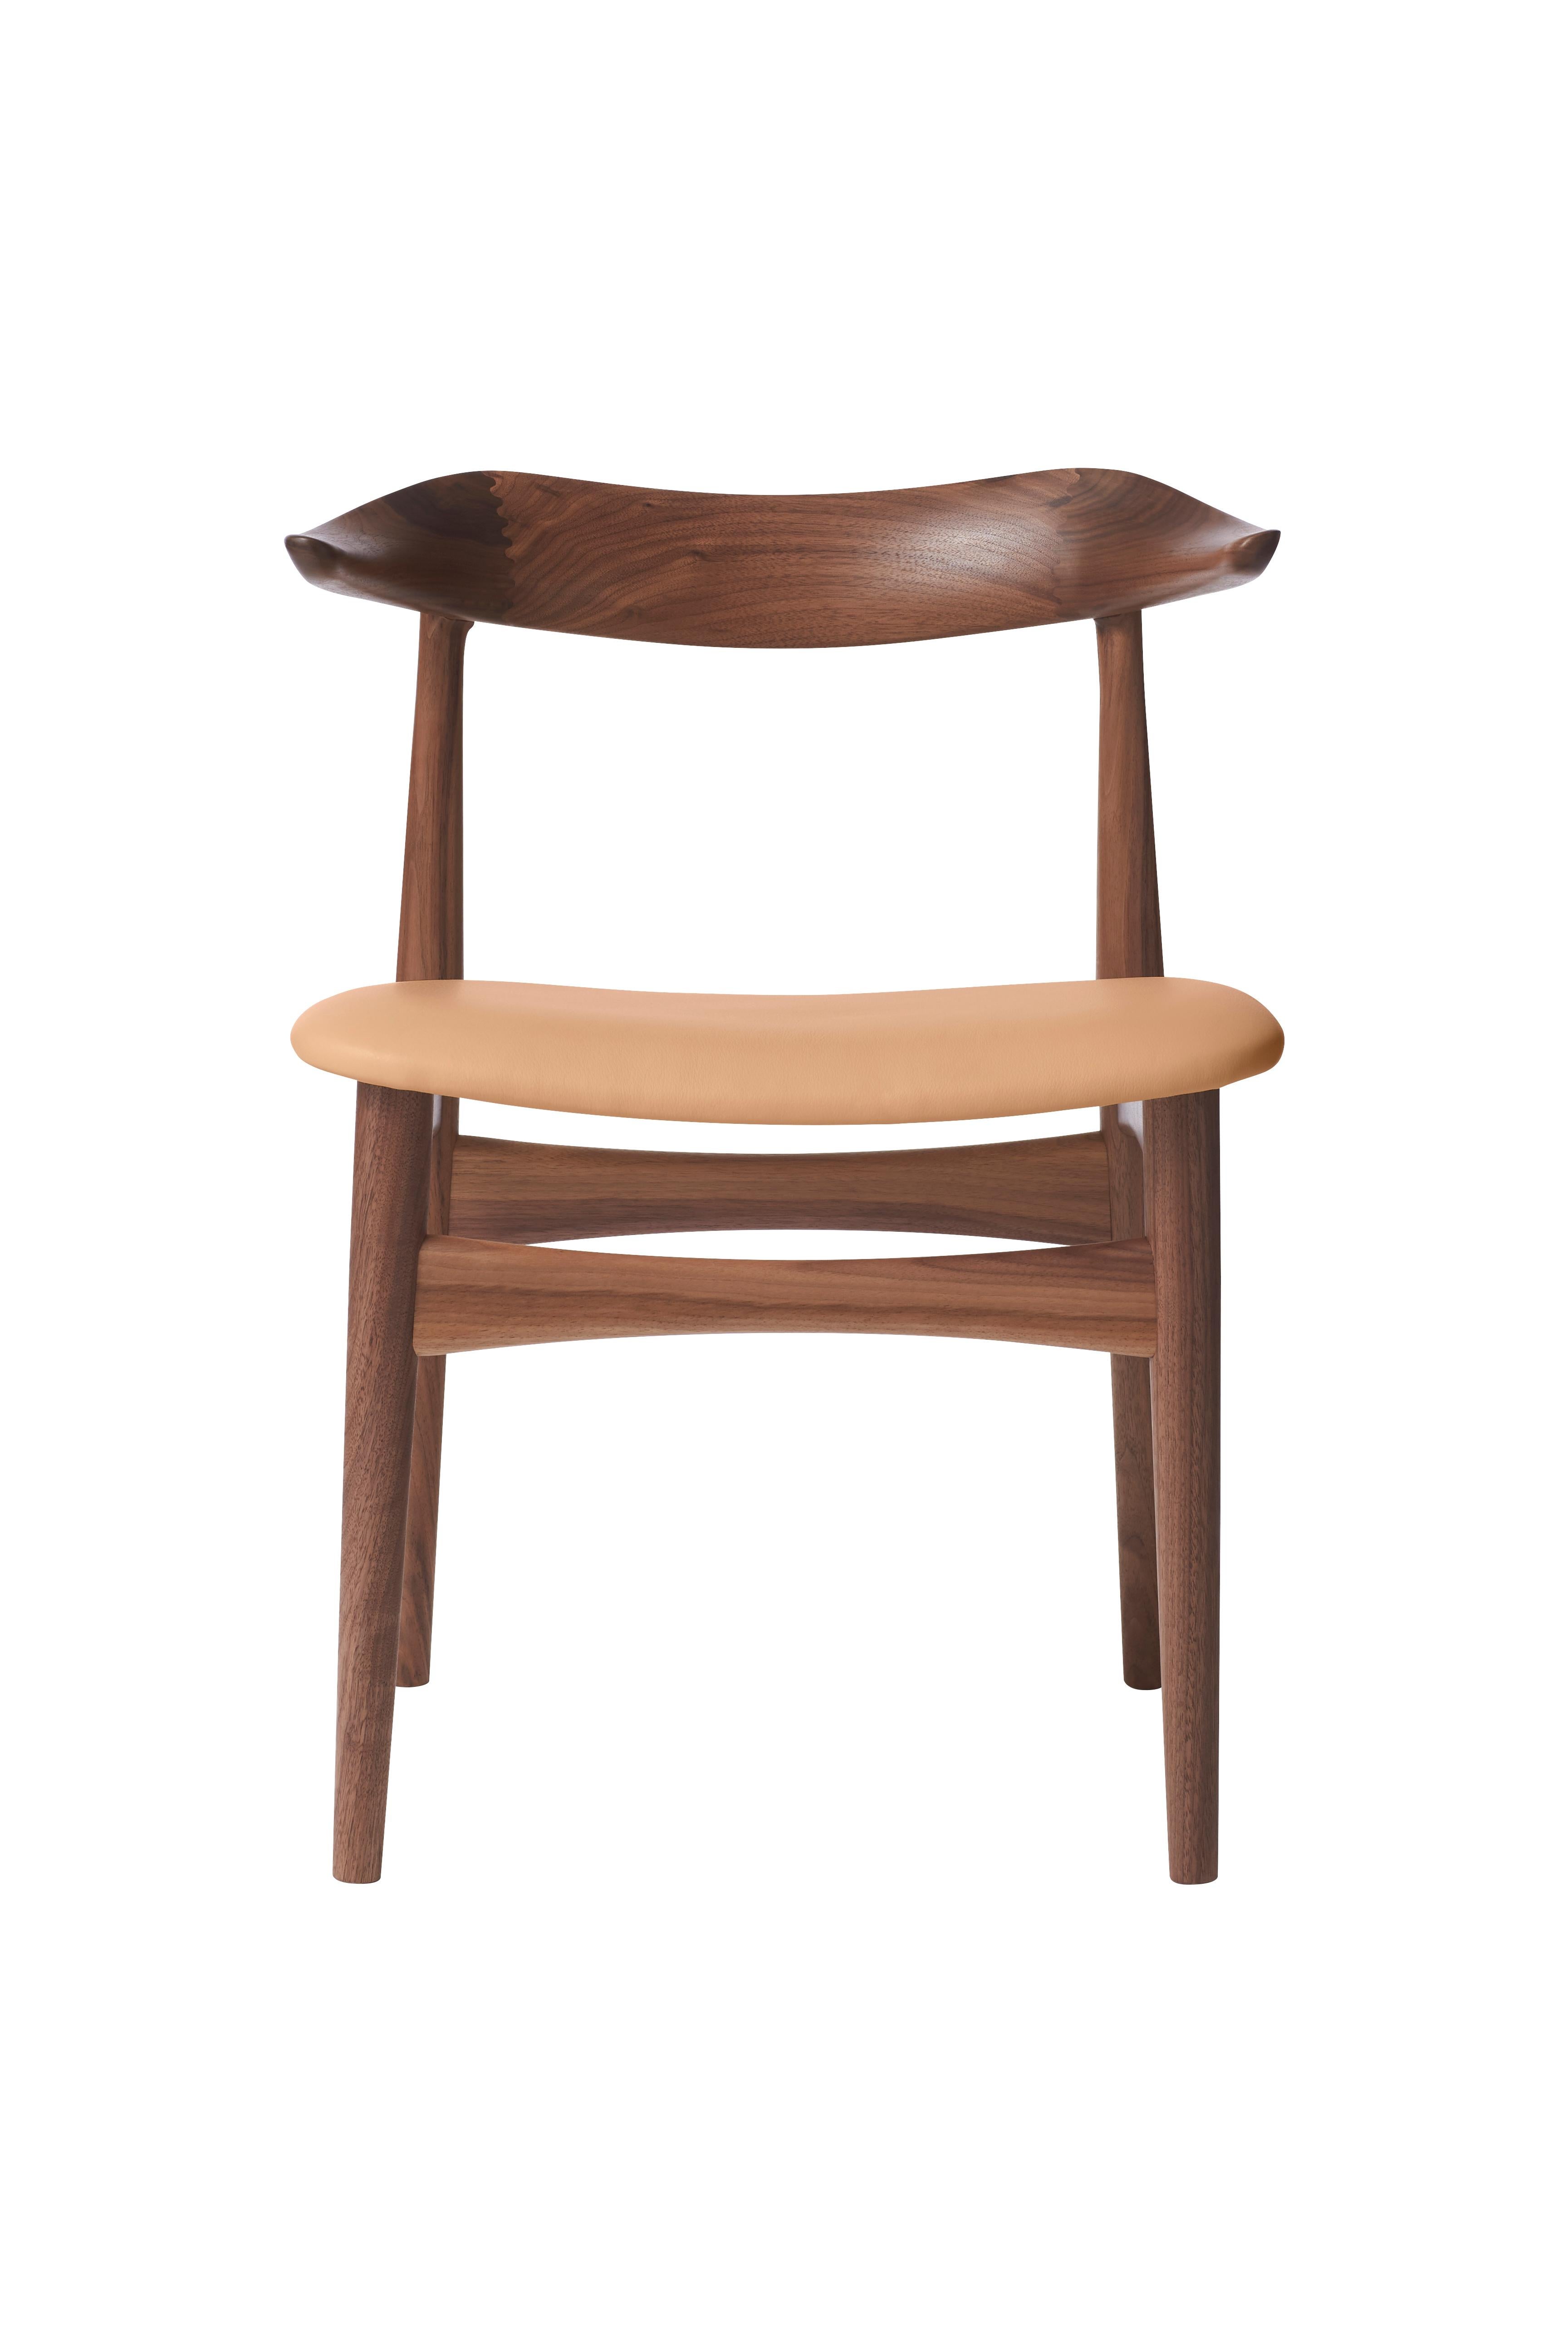 For Sale: Pink (Soavé) Cow Horn Walnut Chair, by Knud Færch from Warm Nordic